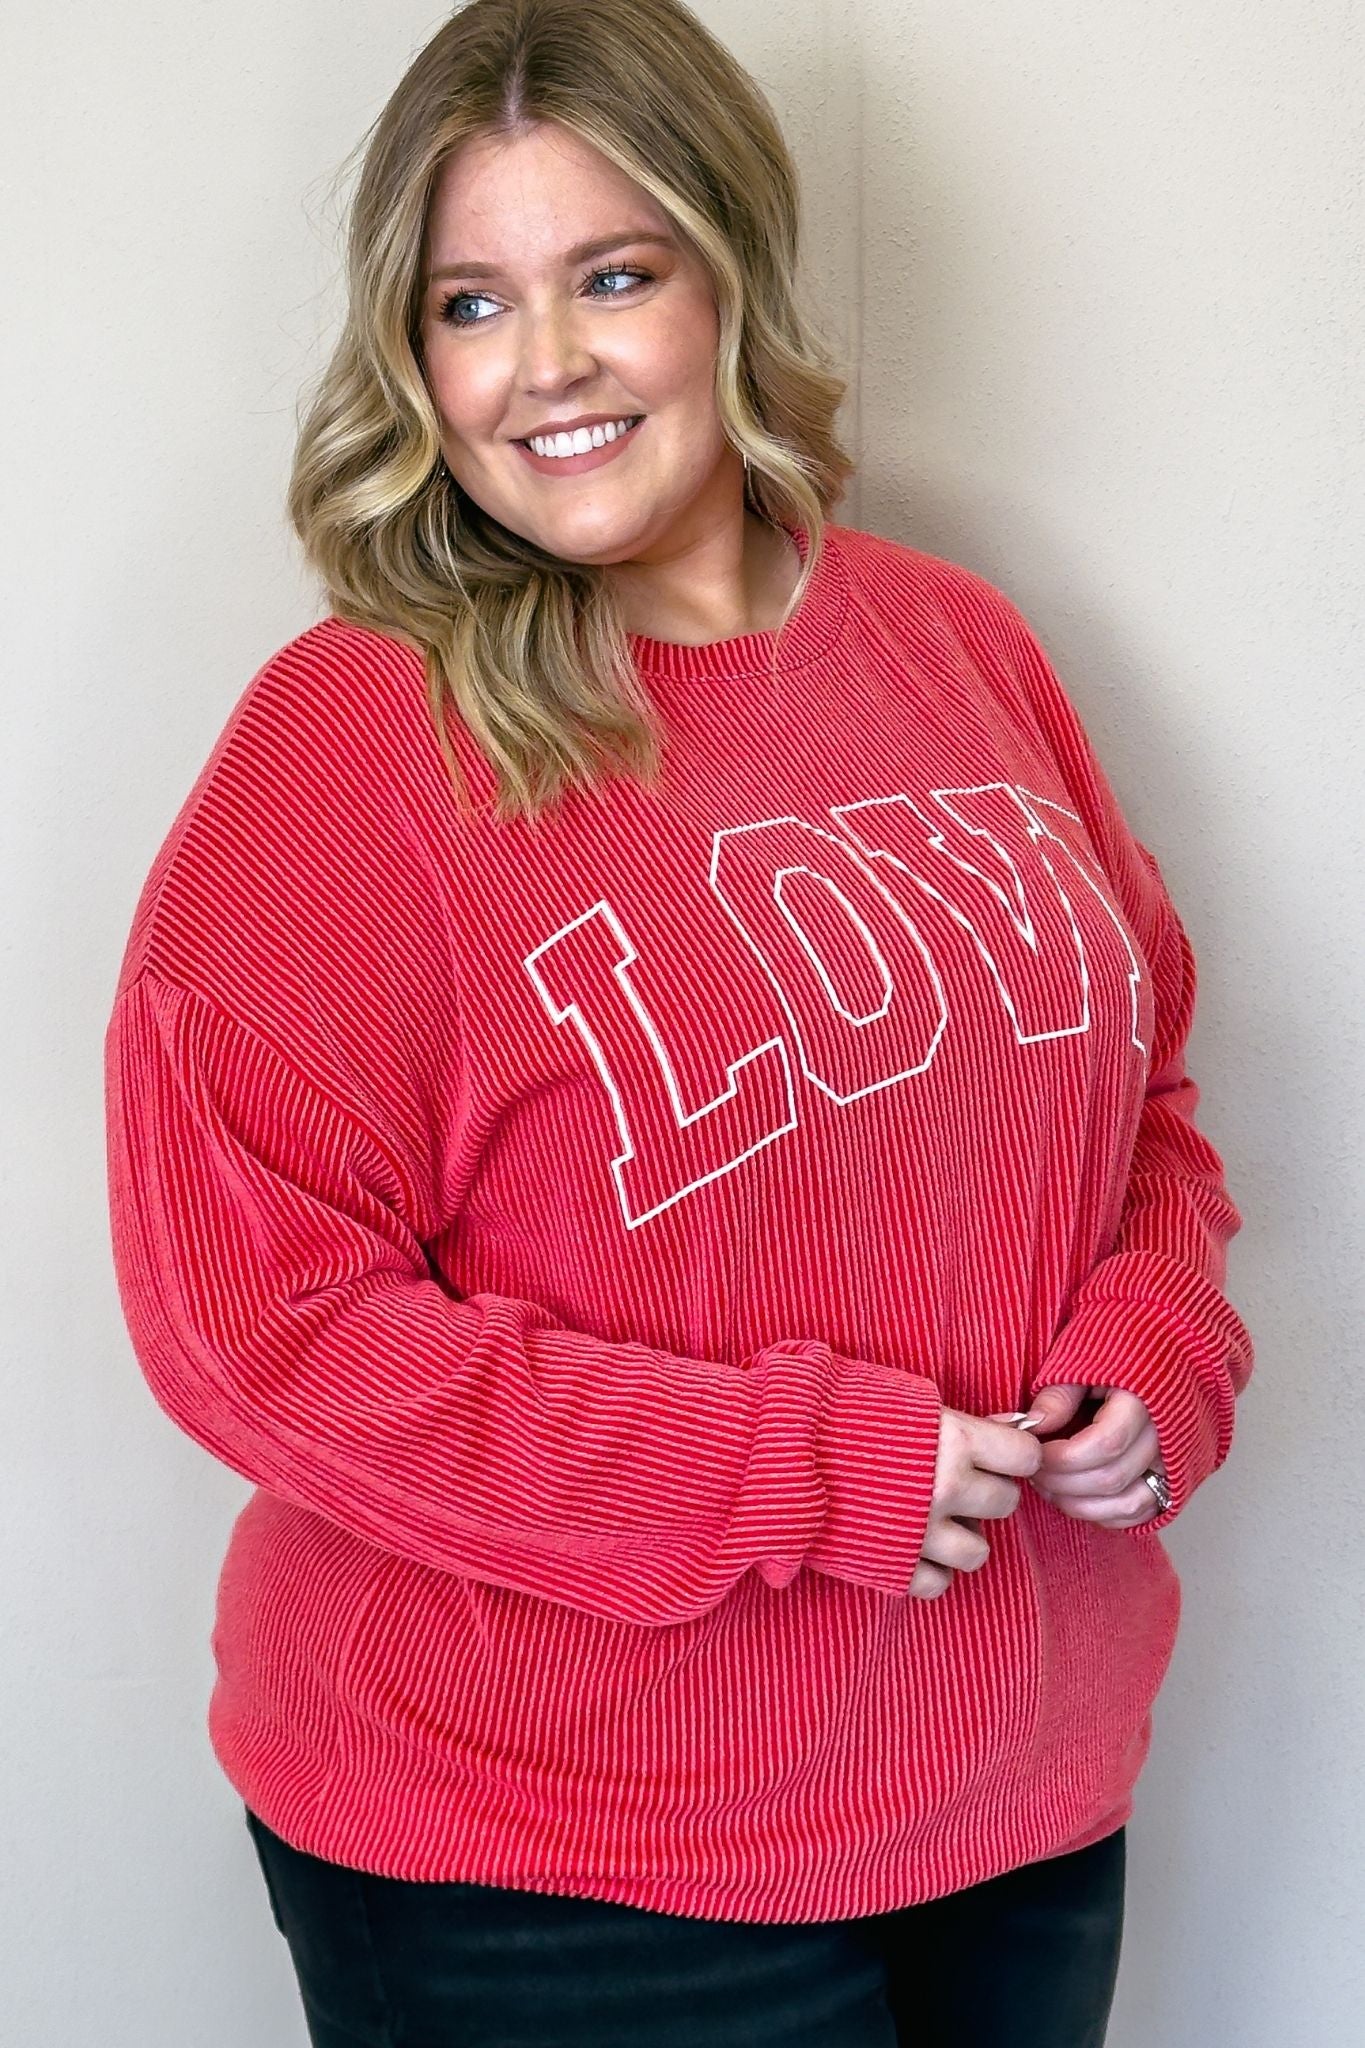 A cozy red sweater with the word "love" written on it. Perfect for spreading warmth and affection.